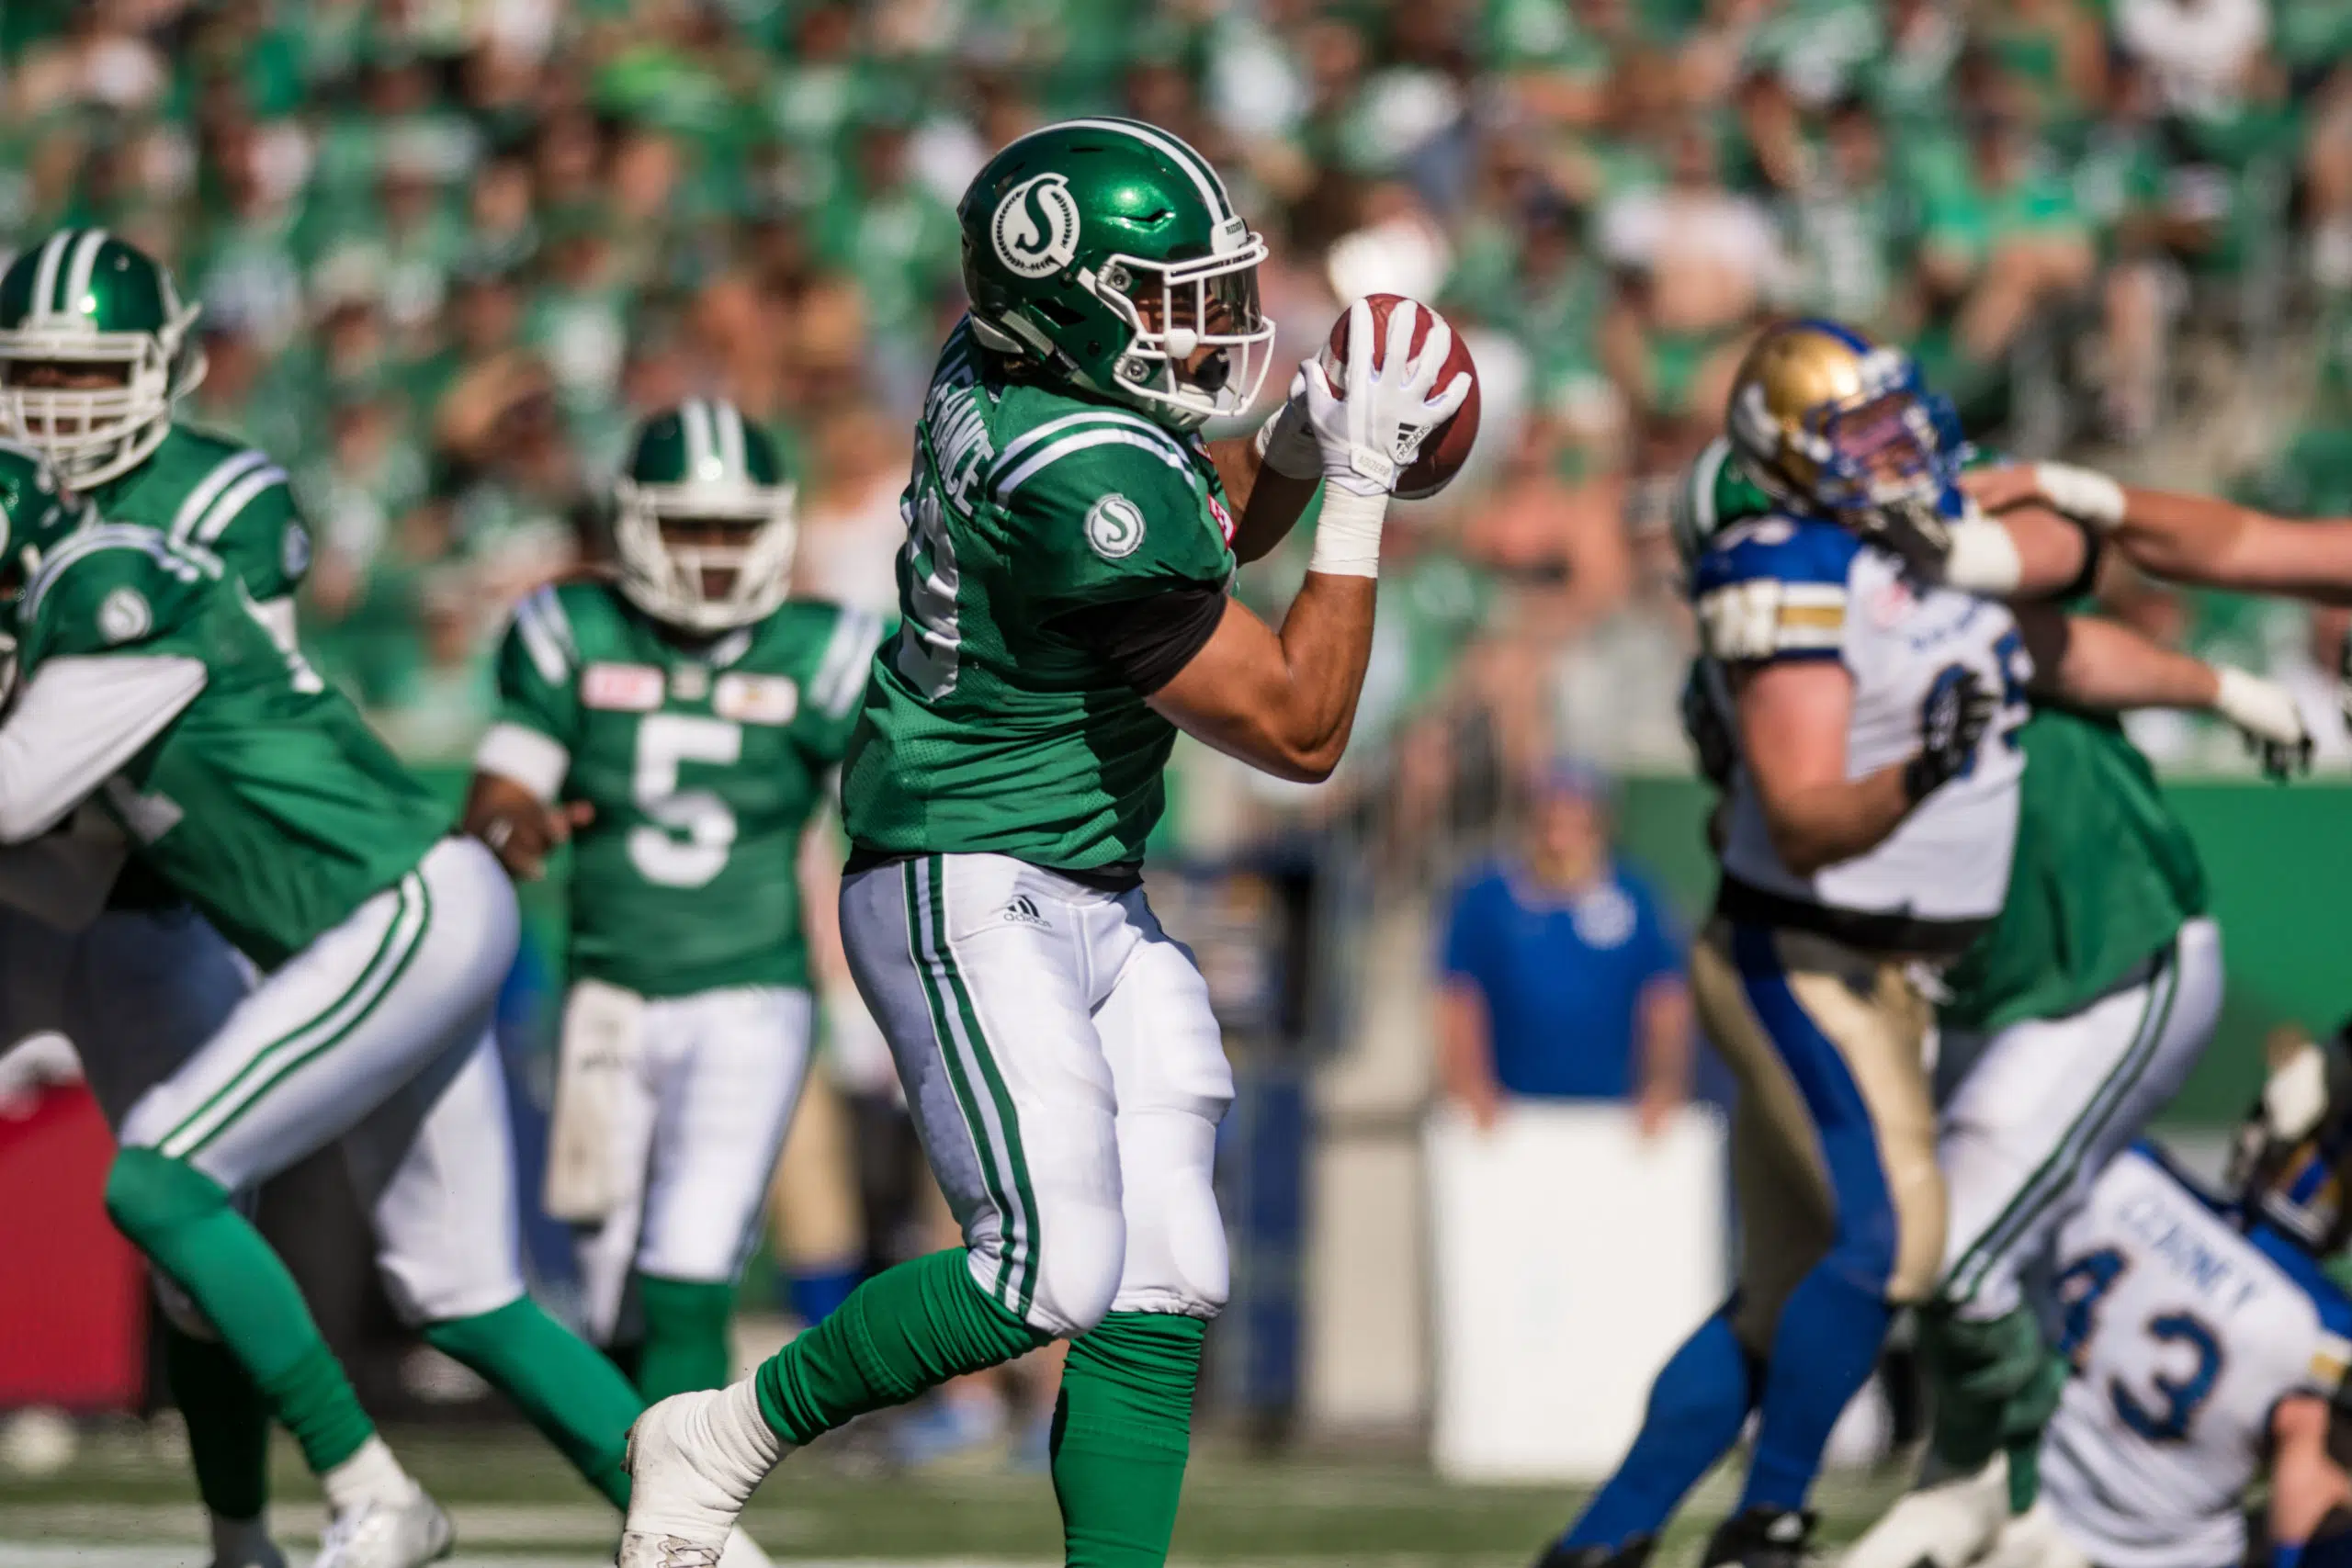 Riders looking for strong finish in the Banjo Bowl